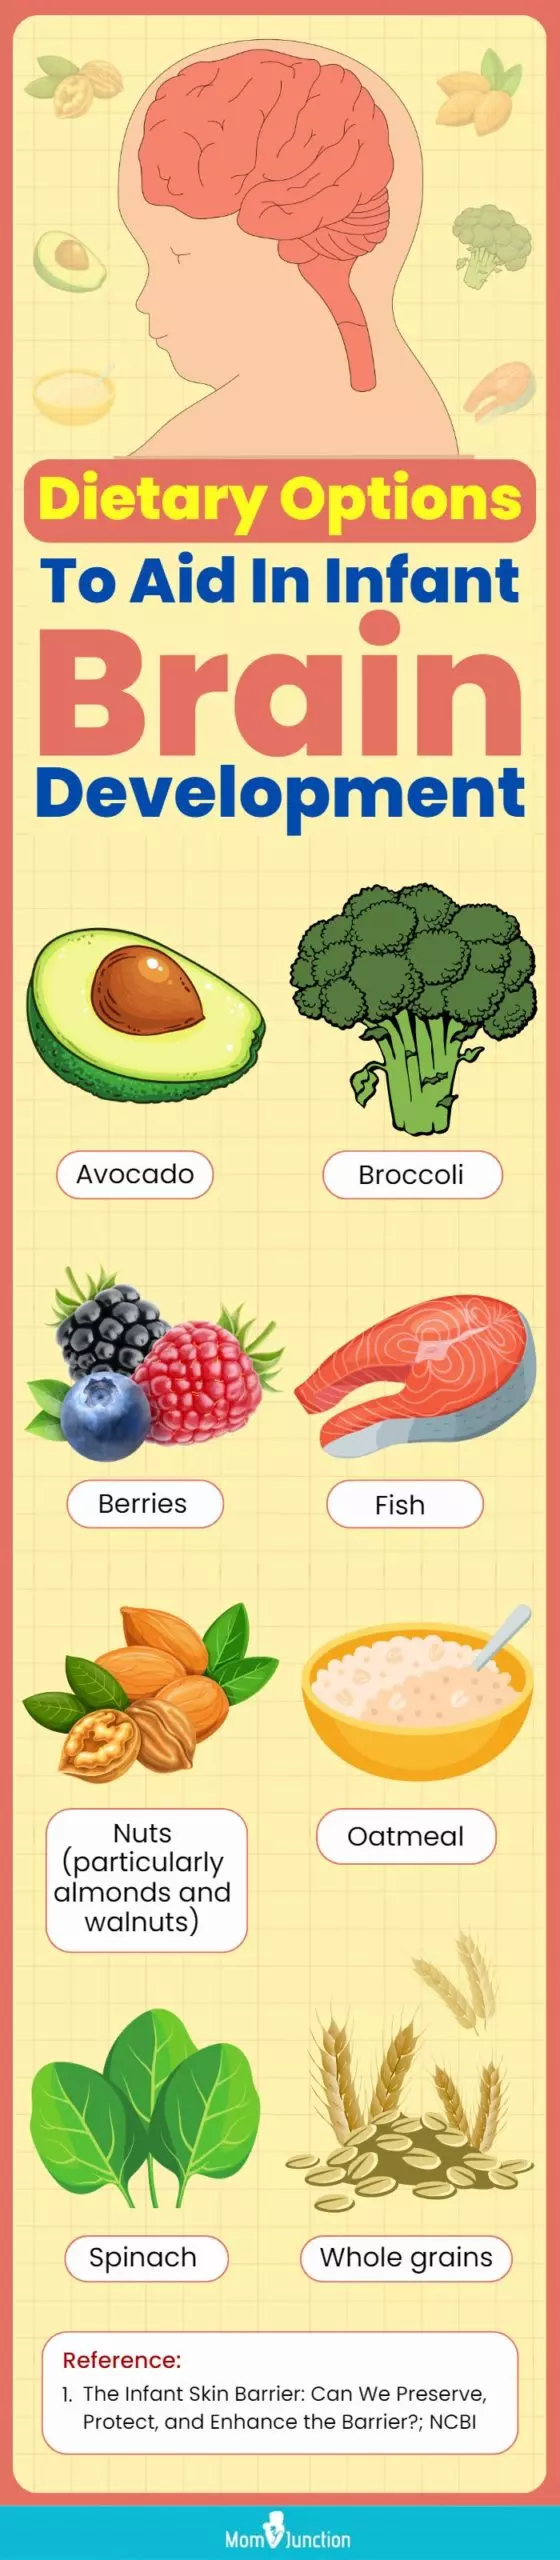 dietary options to aid in infant brain development (infographic)